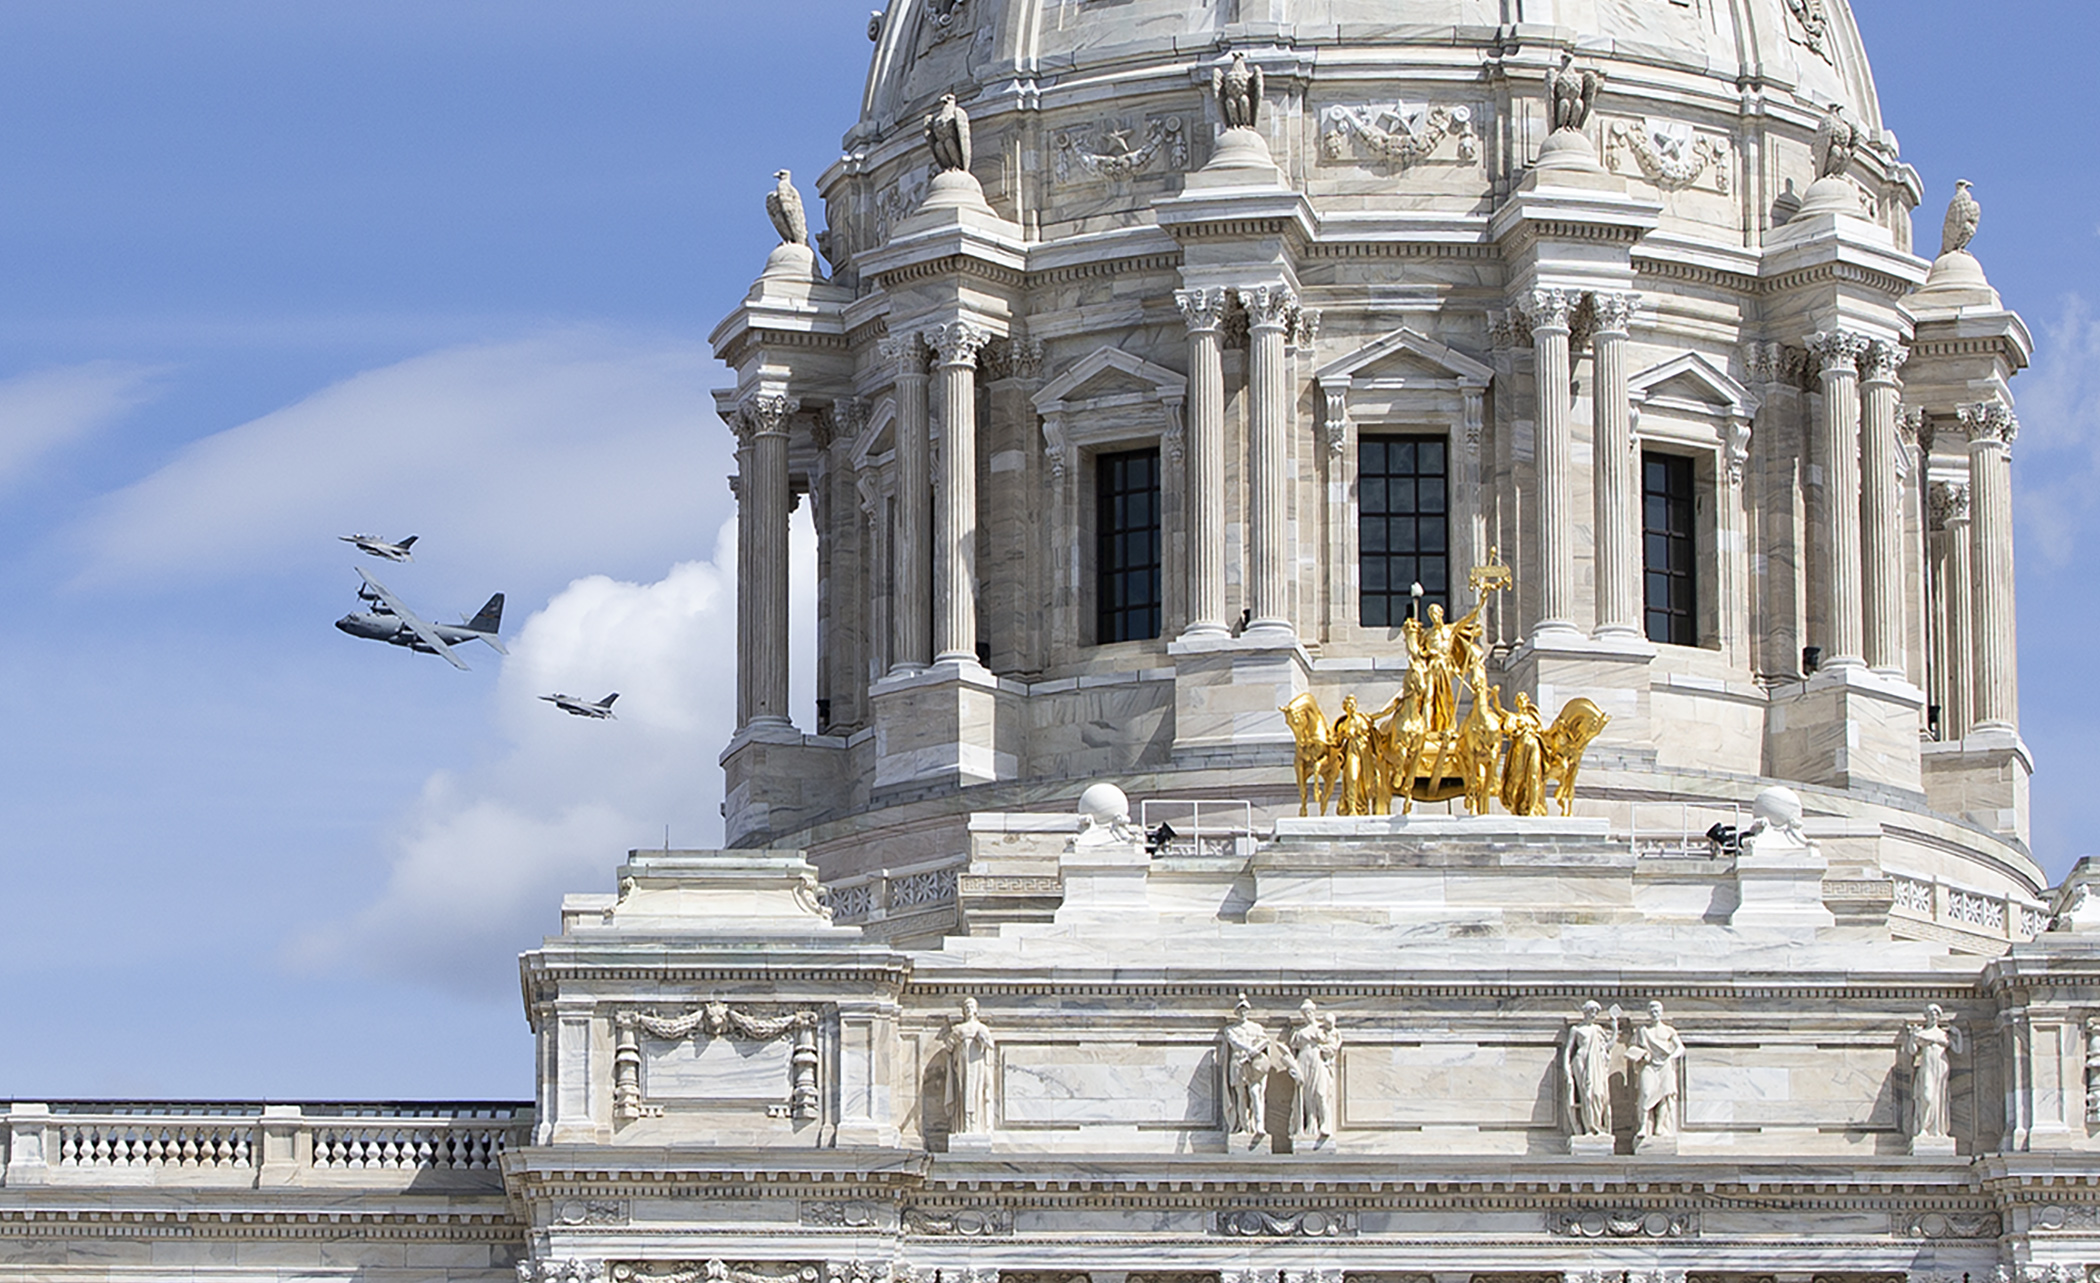 Aircraft from the Minnesota National Guard fly by the Capitol May 6, in recognition of medical workers on the frontlines of the COVID-19 pandemic response. Photo by Paul Battaglia